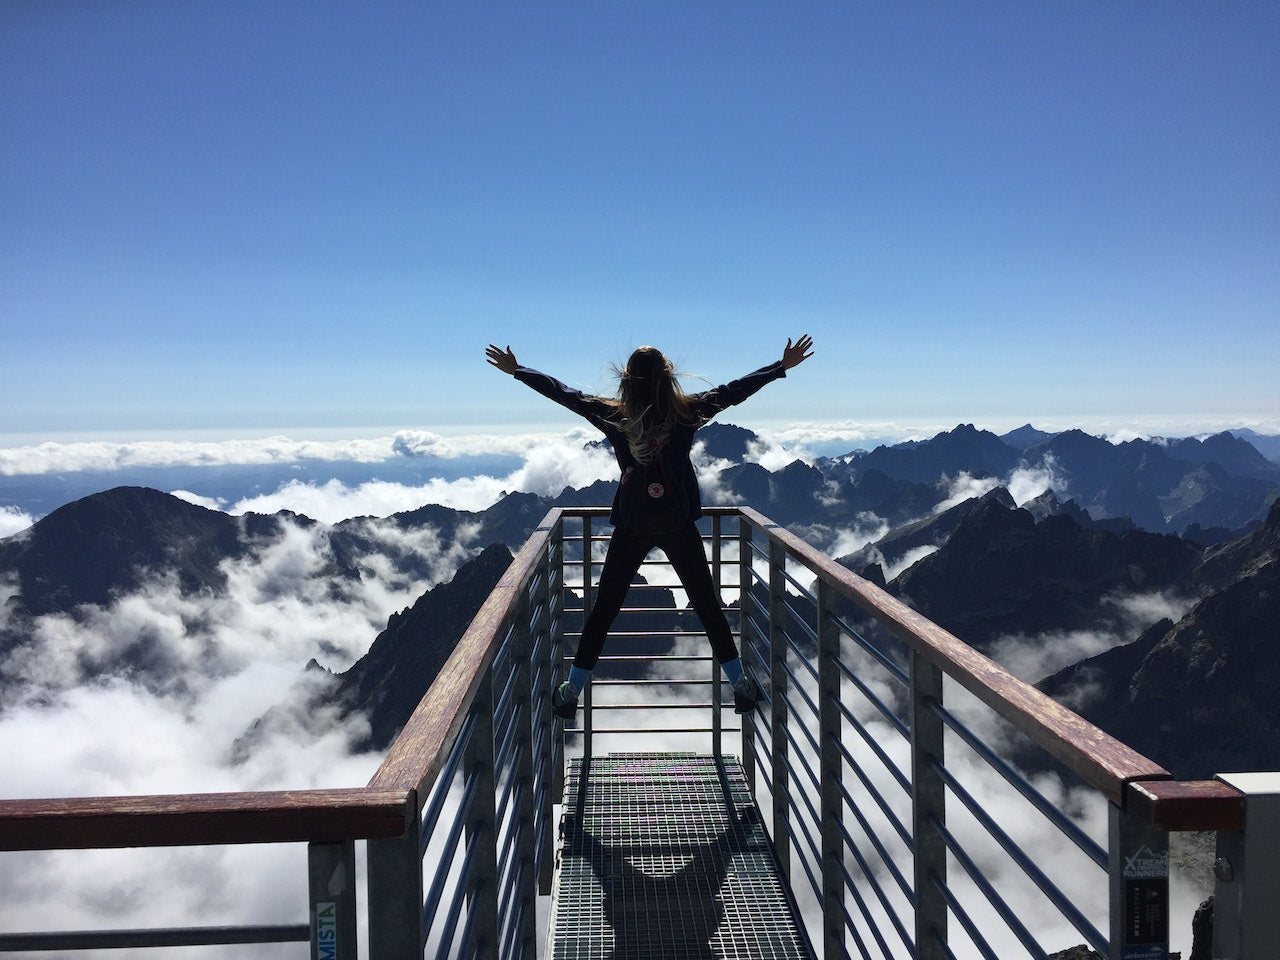 Person with outstretched arms standing on a mountain observation deck above the clouds, celebrating the breathtaking view and sense of achievement